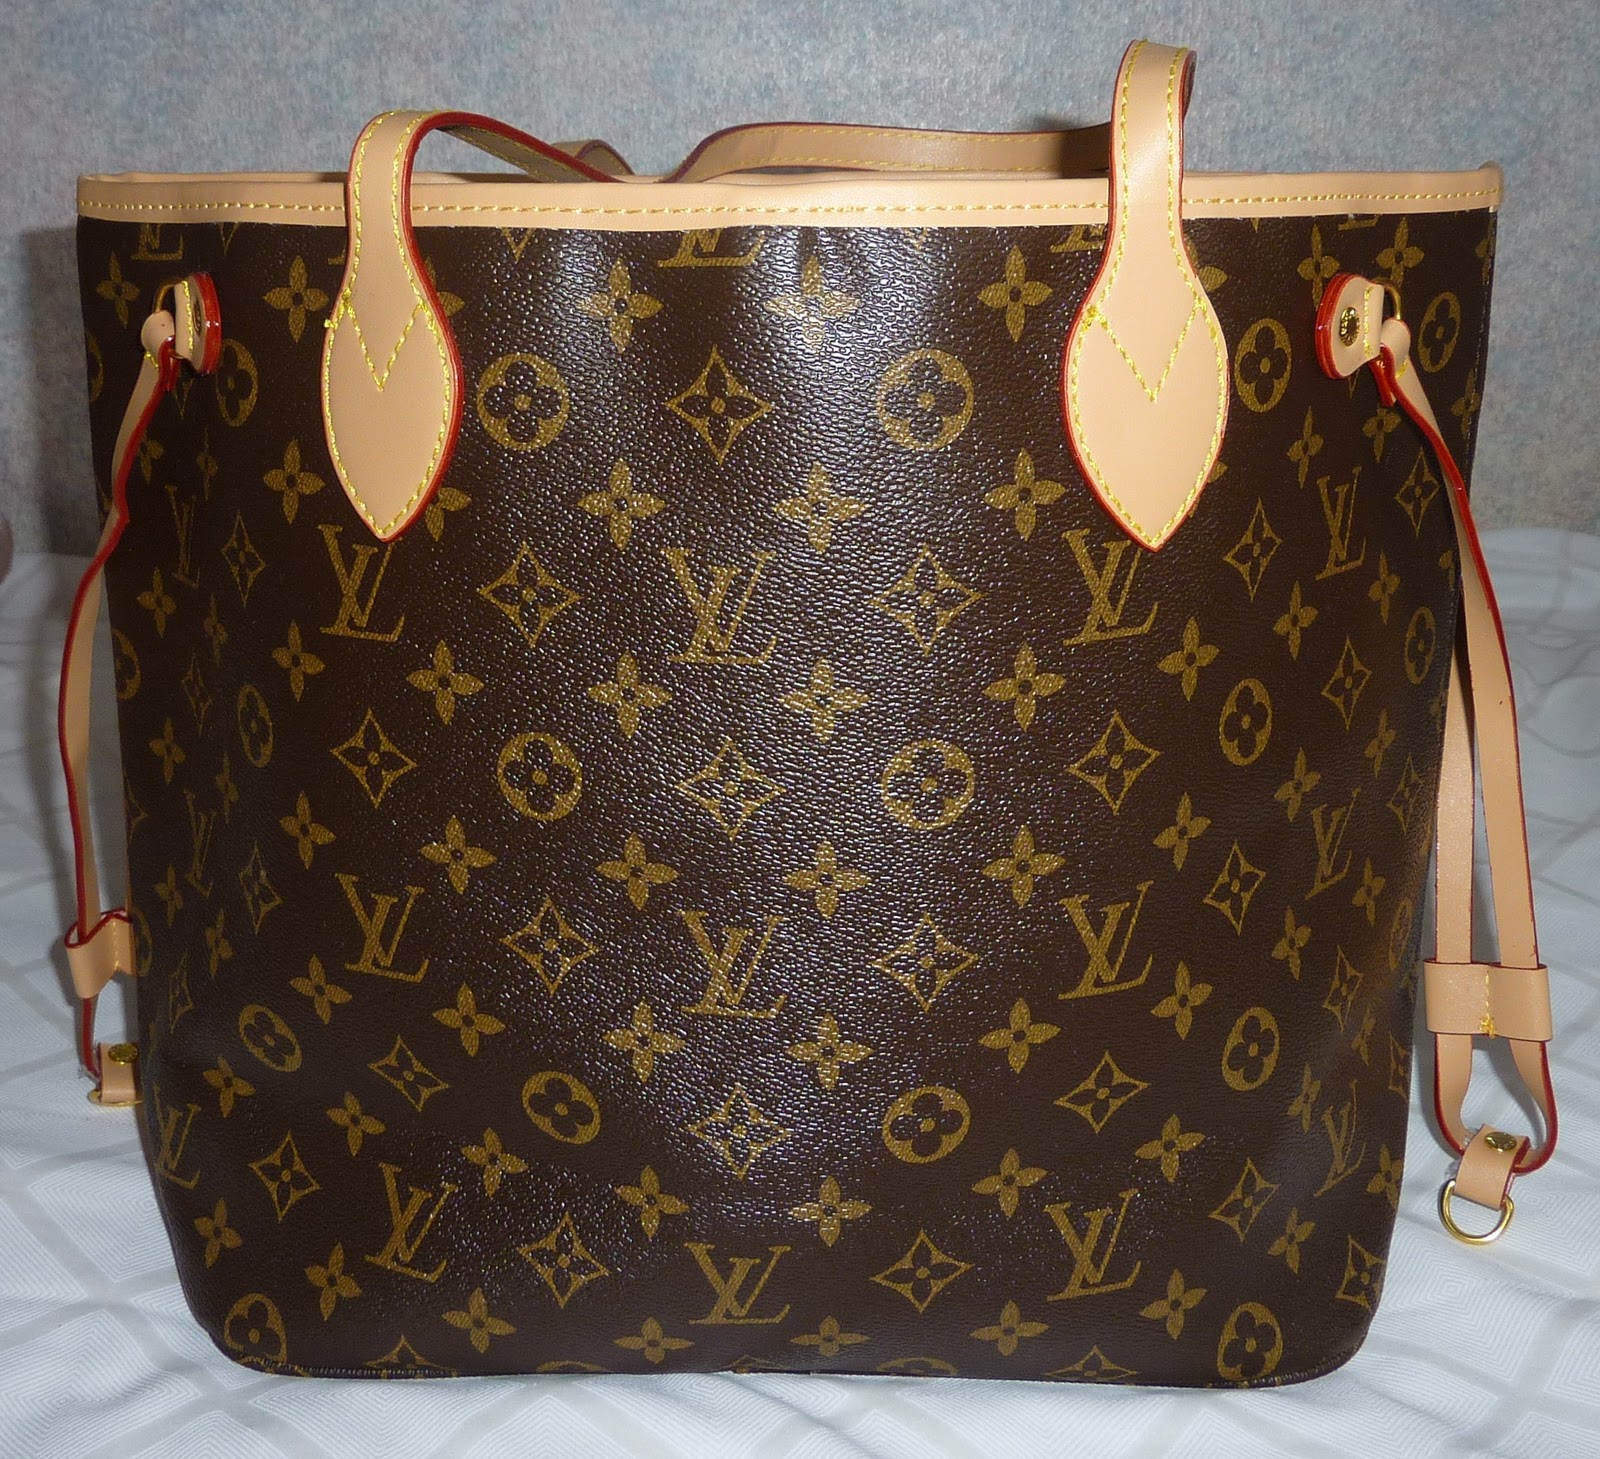 Louis Vuitton Handbags Knockoff Under S 100 | Confederated Tribes of the Umatilla Indian Reservation